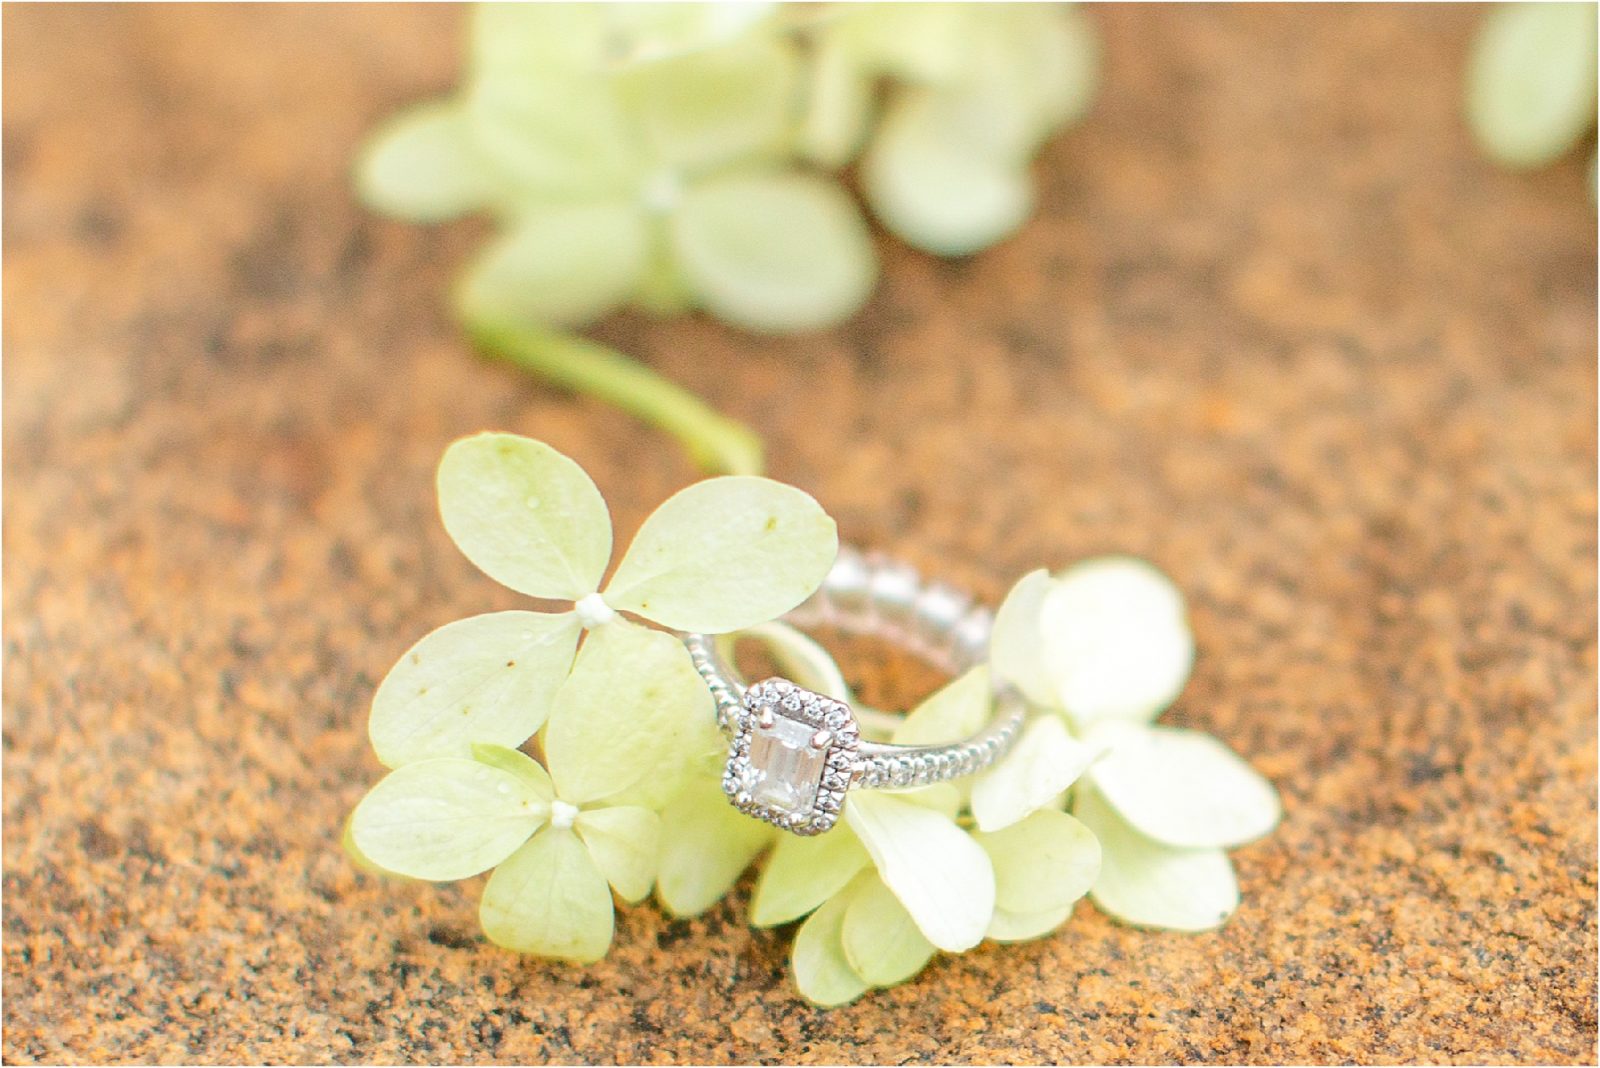 Diamond engagement ring with flowers on stone